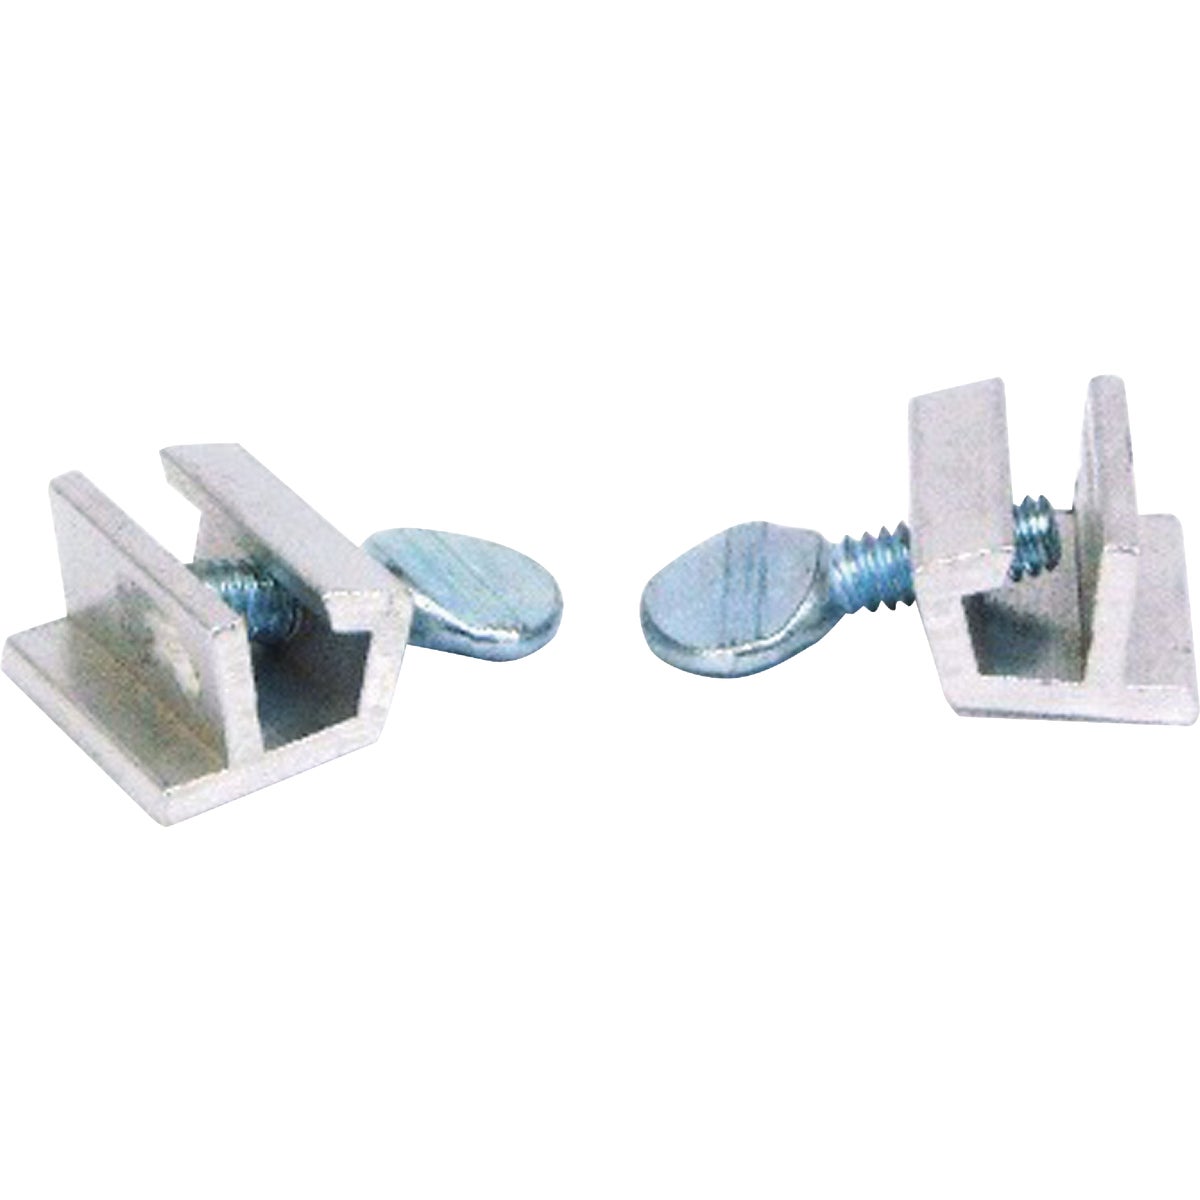 United States Hardware Window Security Lock (2 Count)